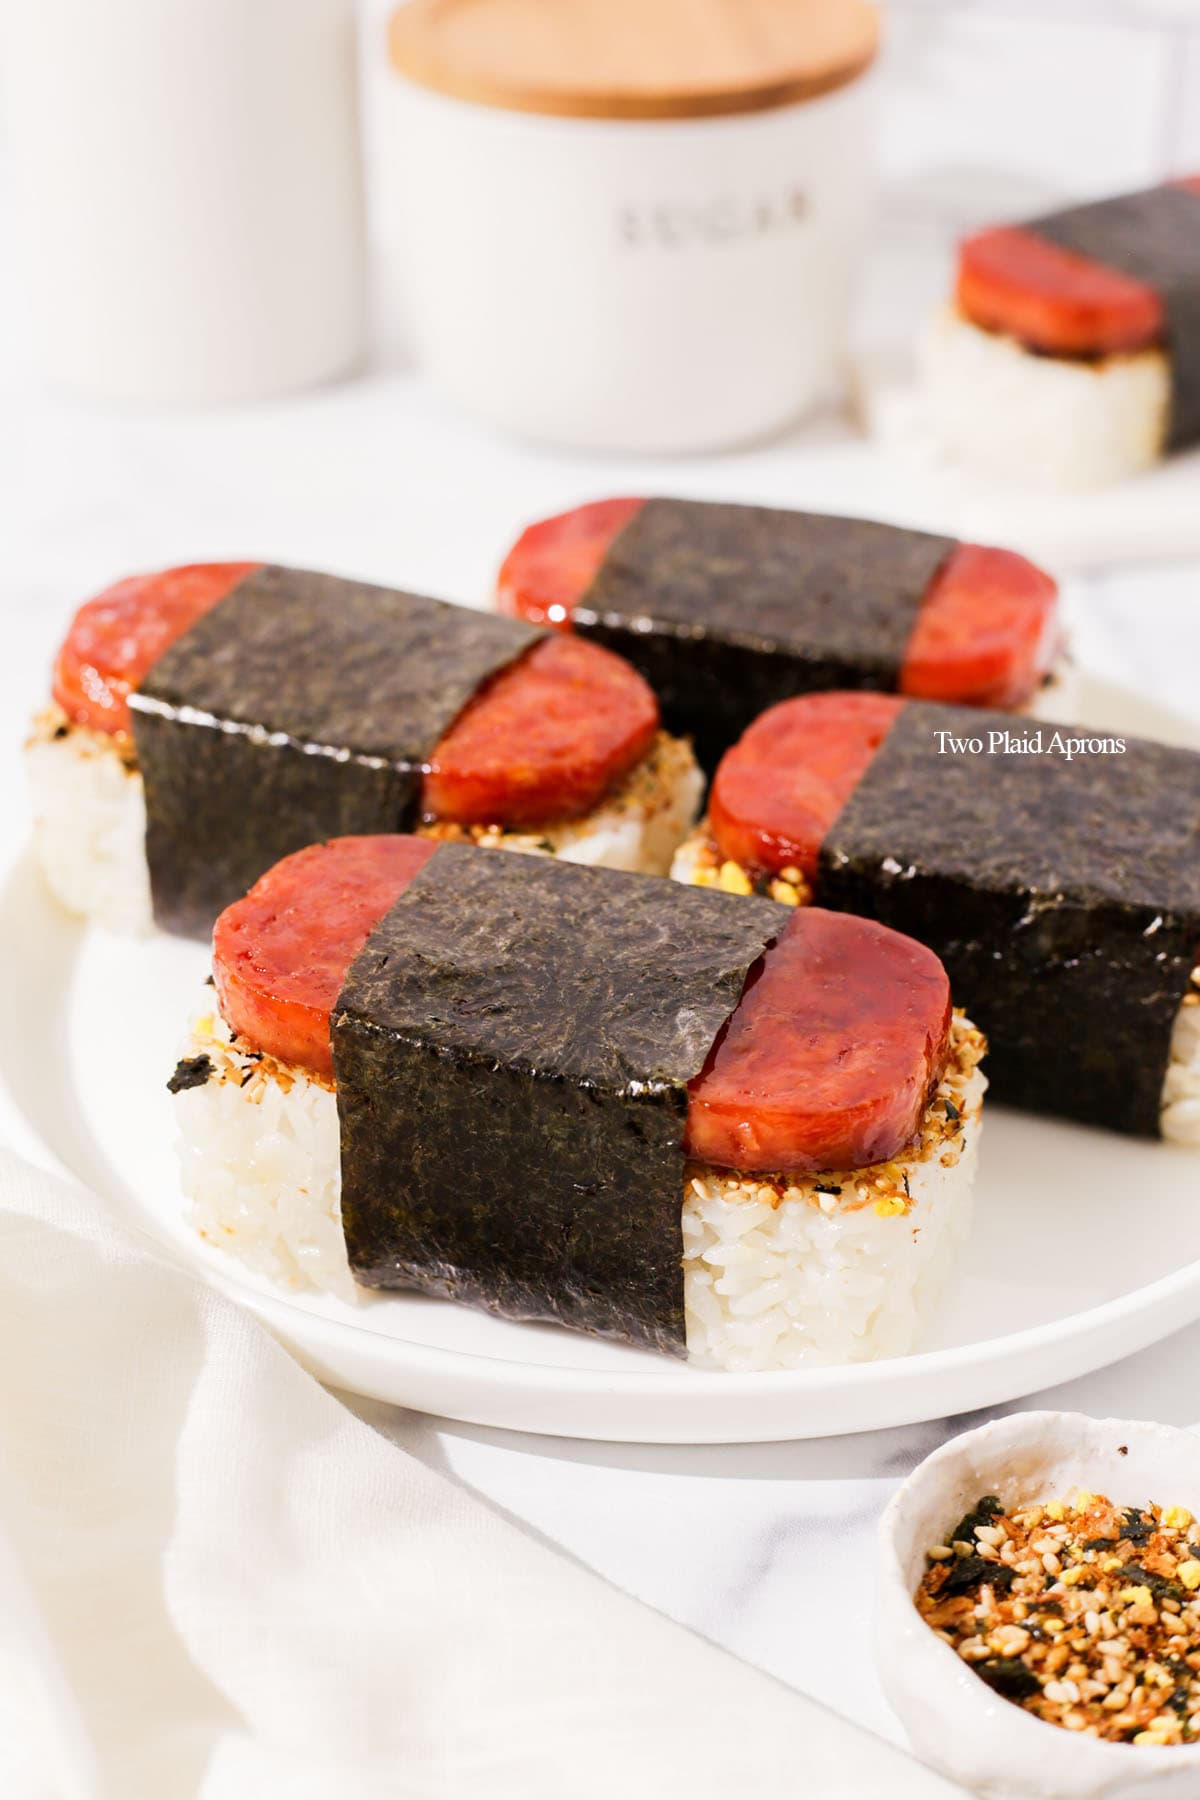 Spam musubi on plate.